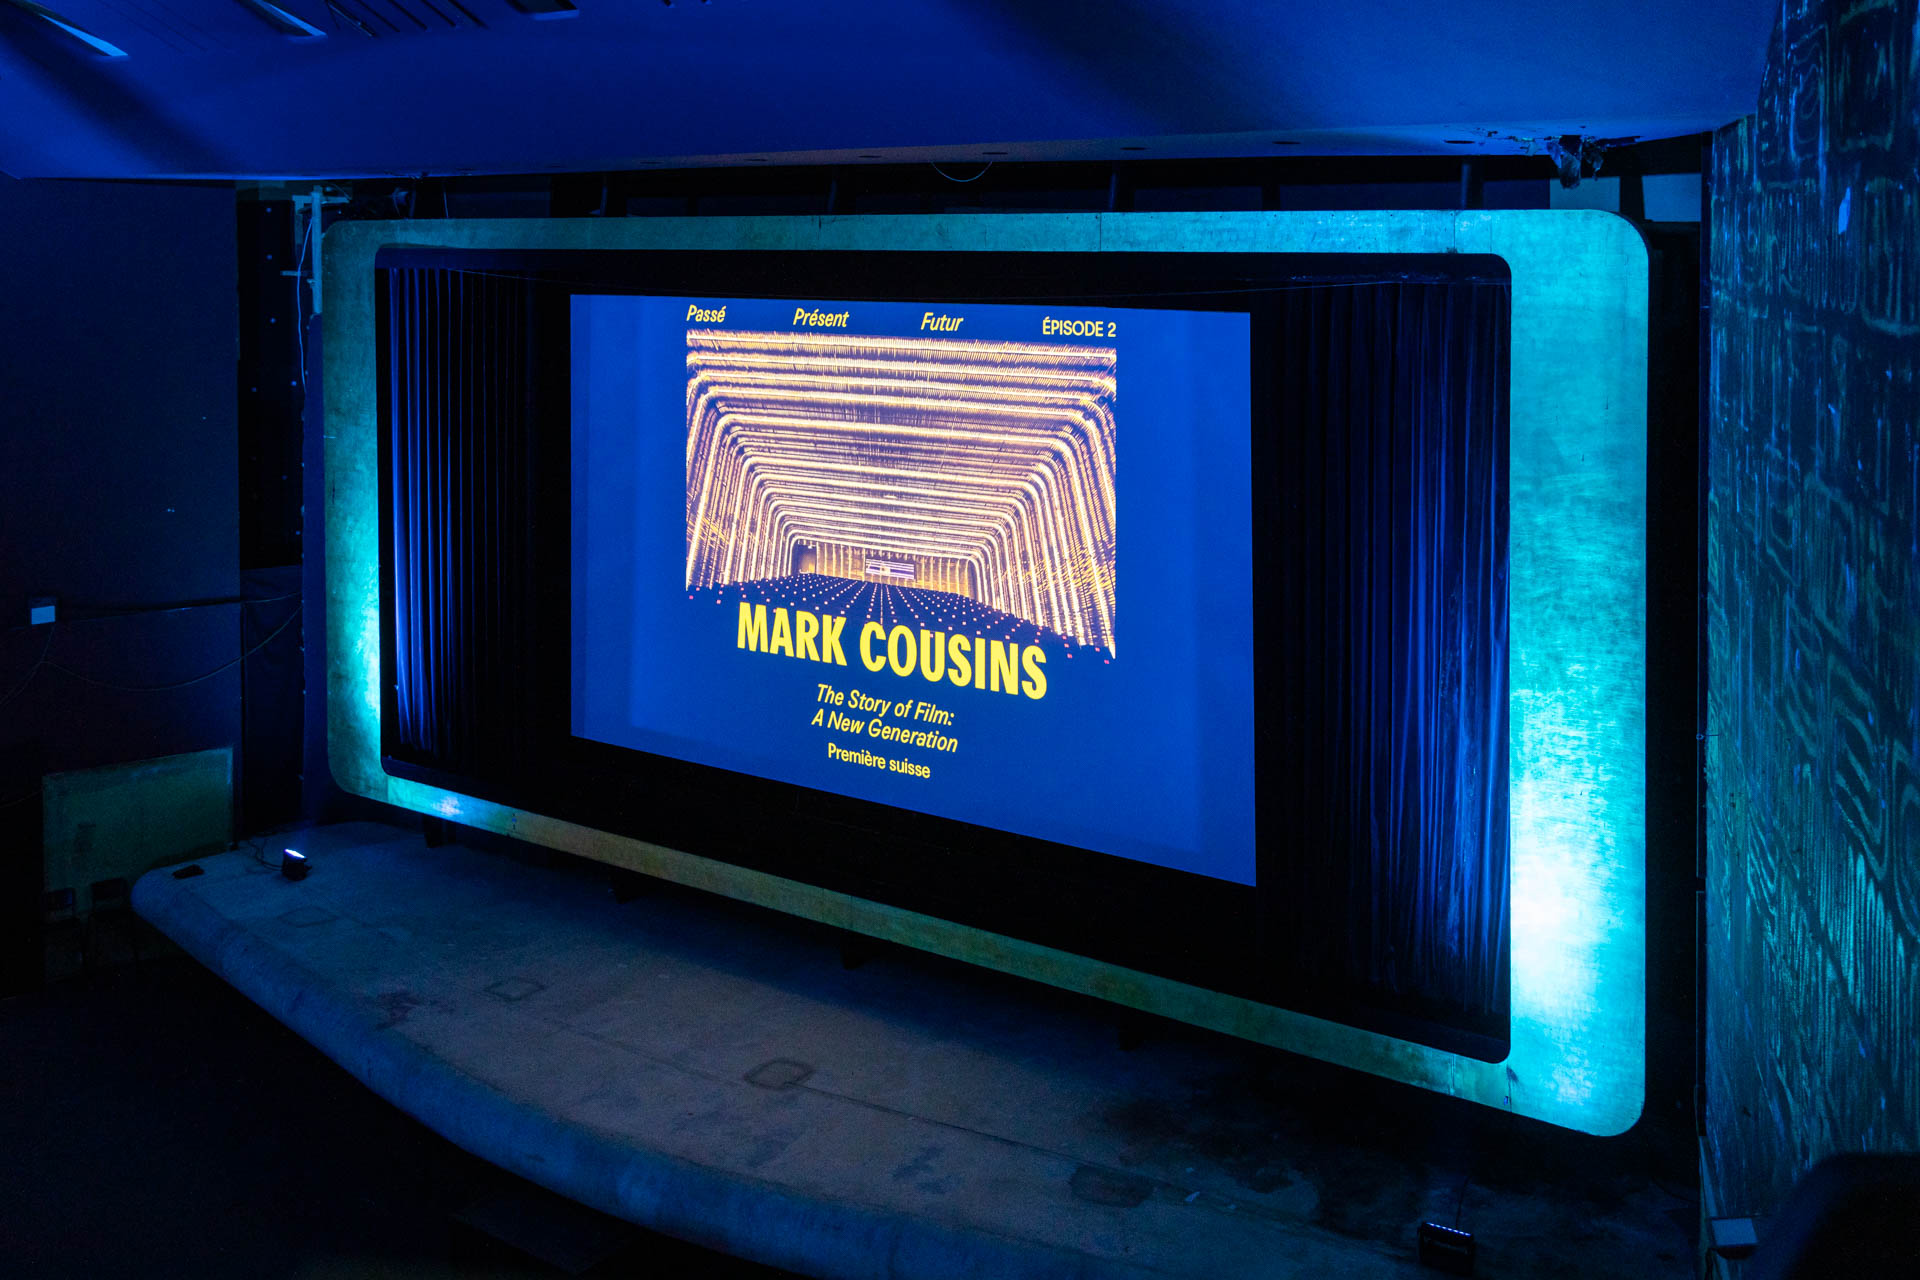 The Story of Film with Mark Cousins at the Plaza